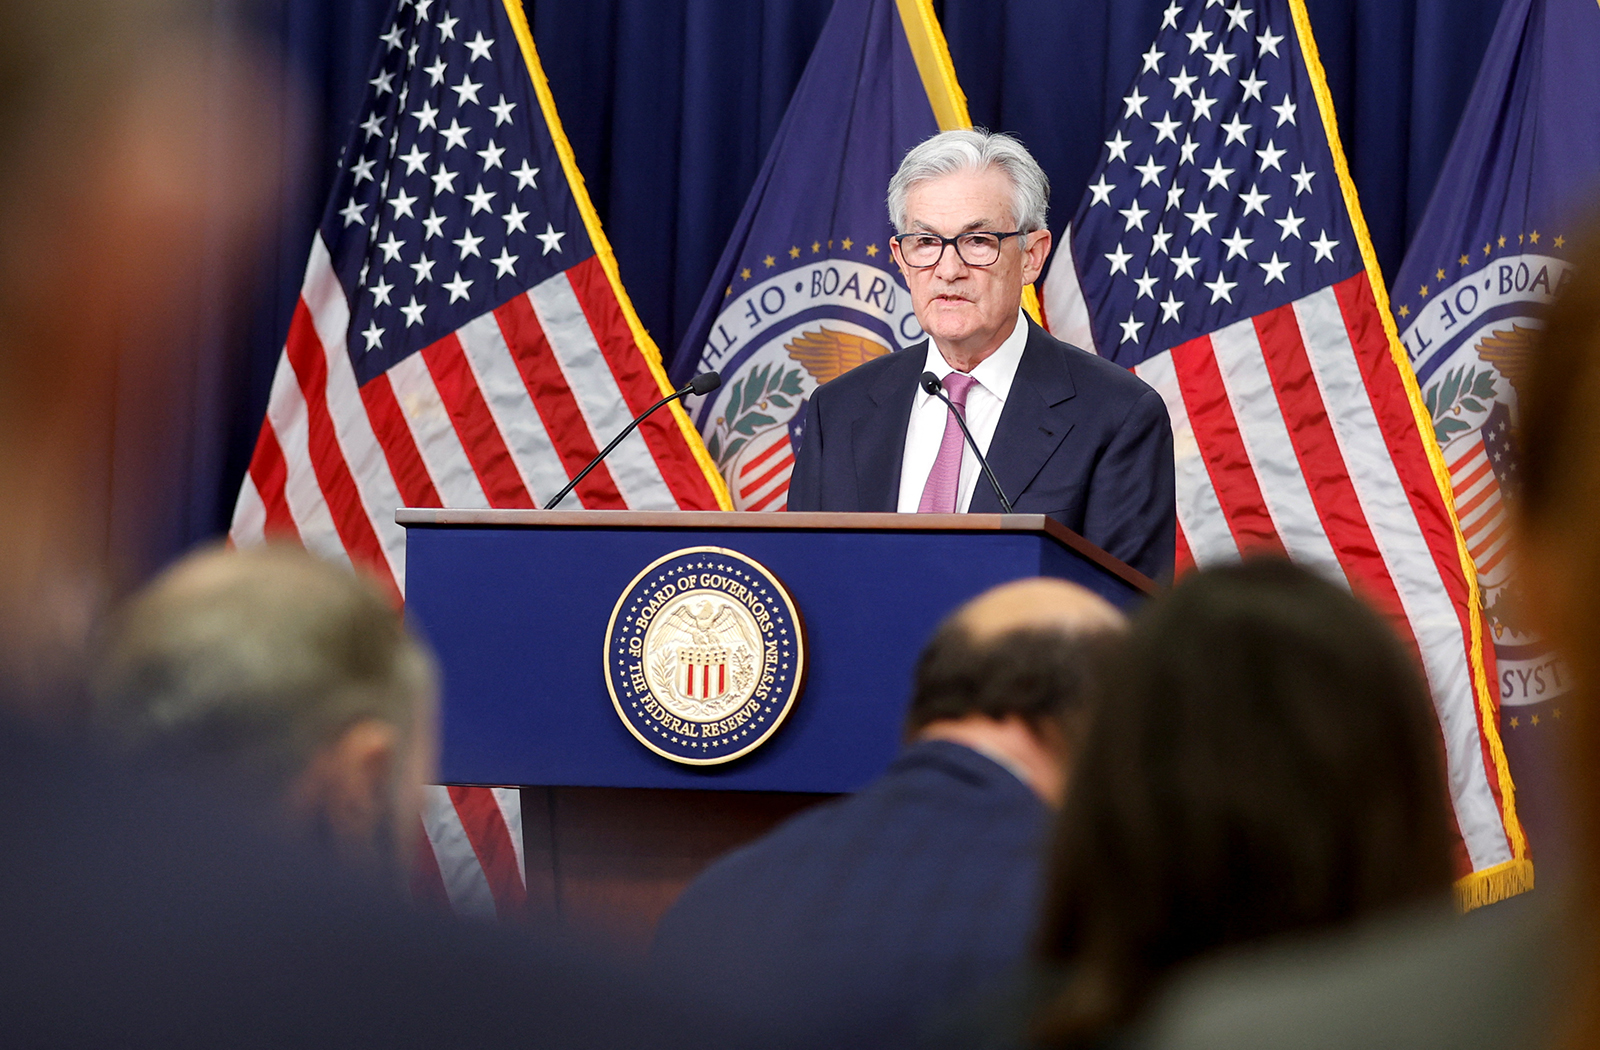 U.S. Federal Reserve Chair Jerome Powell addresses reporters after the Fed raised its target interest rate by a quarter of a percentage point, during a news conference at the Federal Reserve Building in Washington, D.C., on February 1.